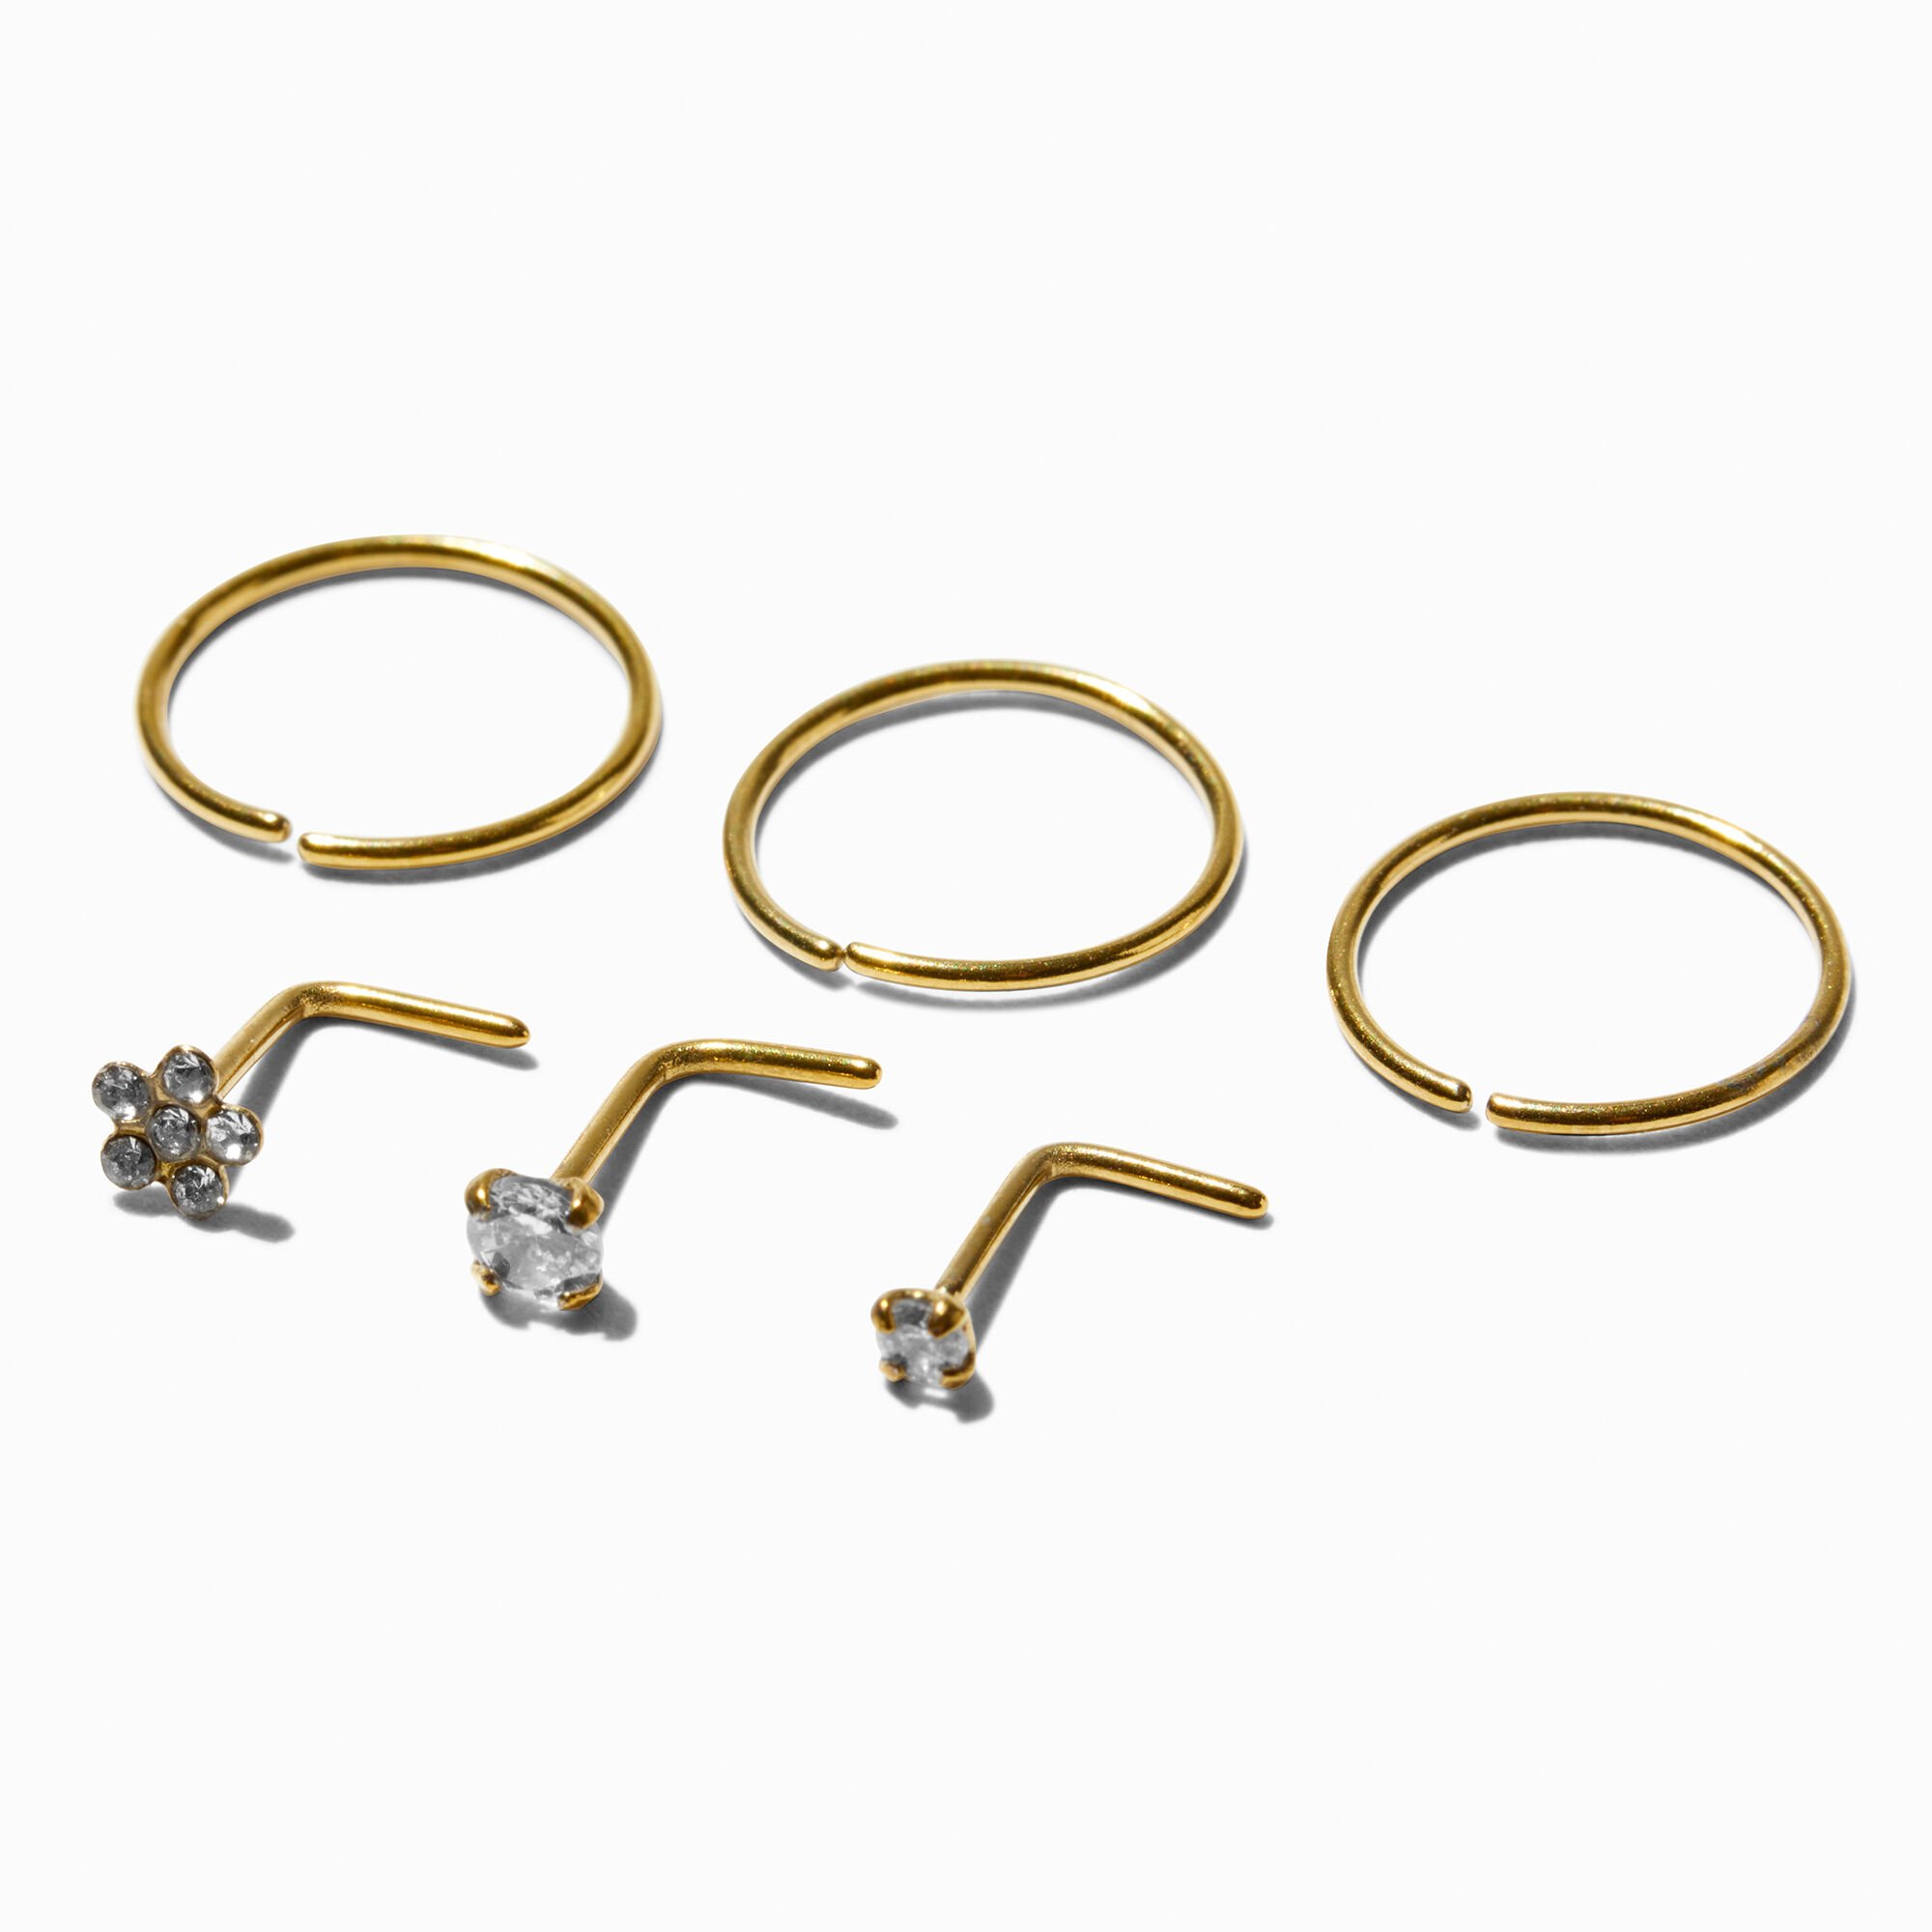 View Claires Tone Stainless Steel 20G Daisy Square Crystal Studs Hoops 6 Pack Gold information